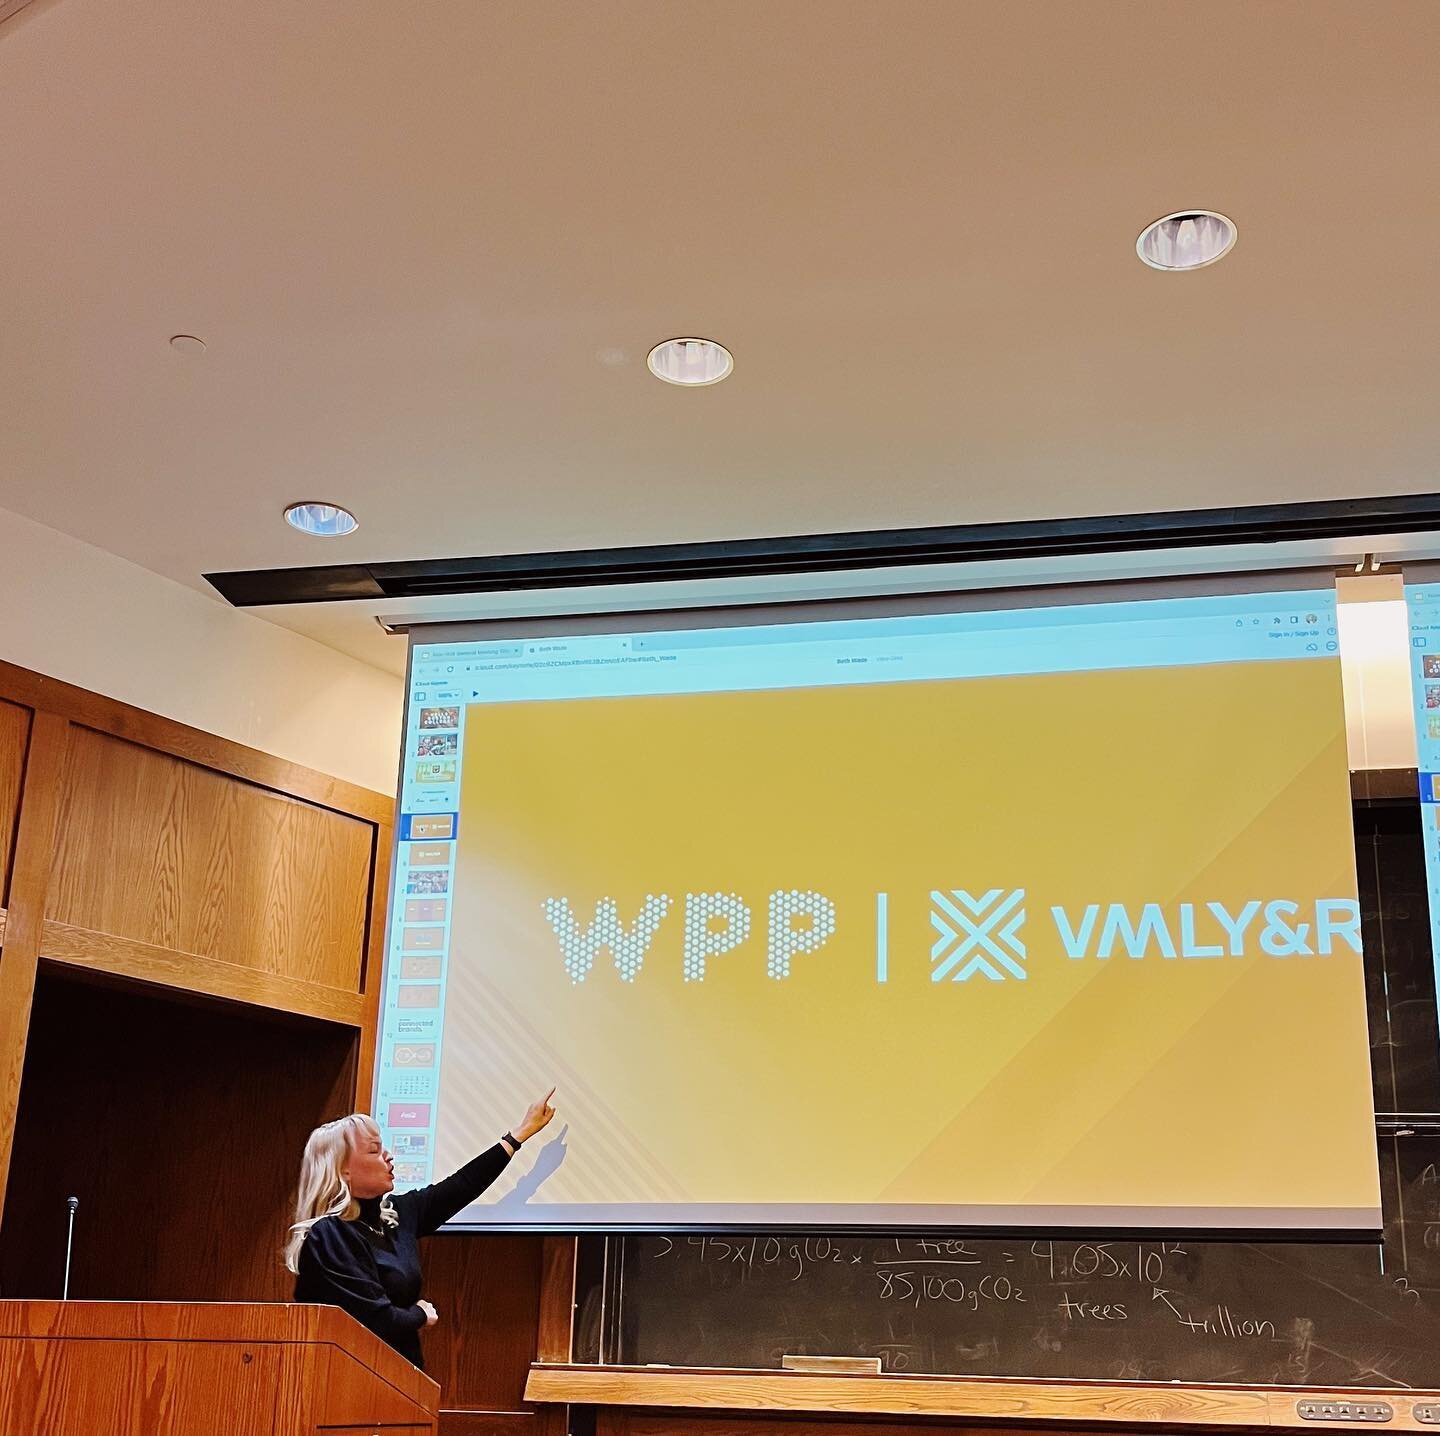 Snapshots from our November General Meeting where we heard from Beth Wade, Chief Marketing Officer at VMLY&amp;R❕

HUGE thank you to Beth for her insight on working at such an impactful advertising company &amp; to everyone for the amazing turnout !!